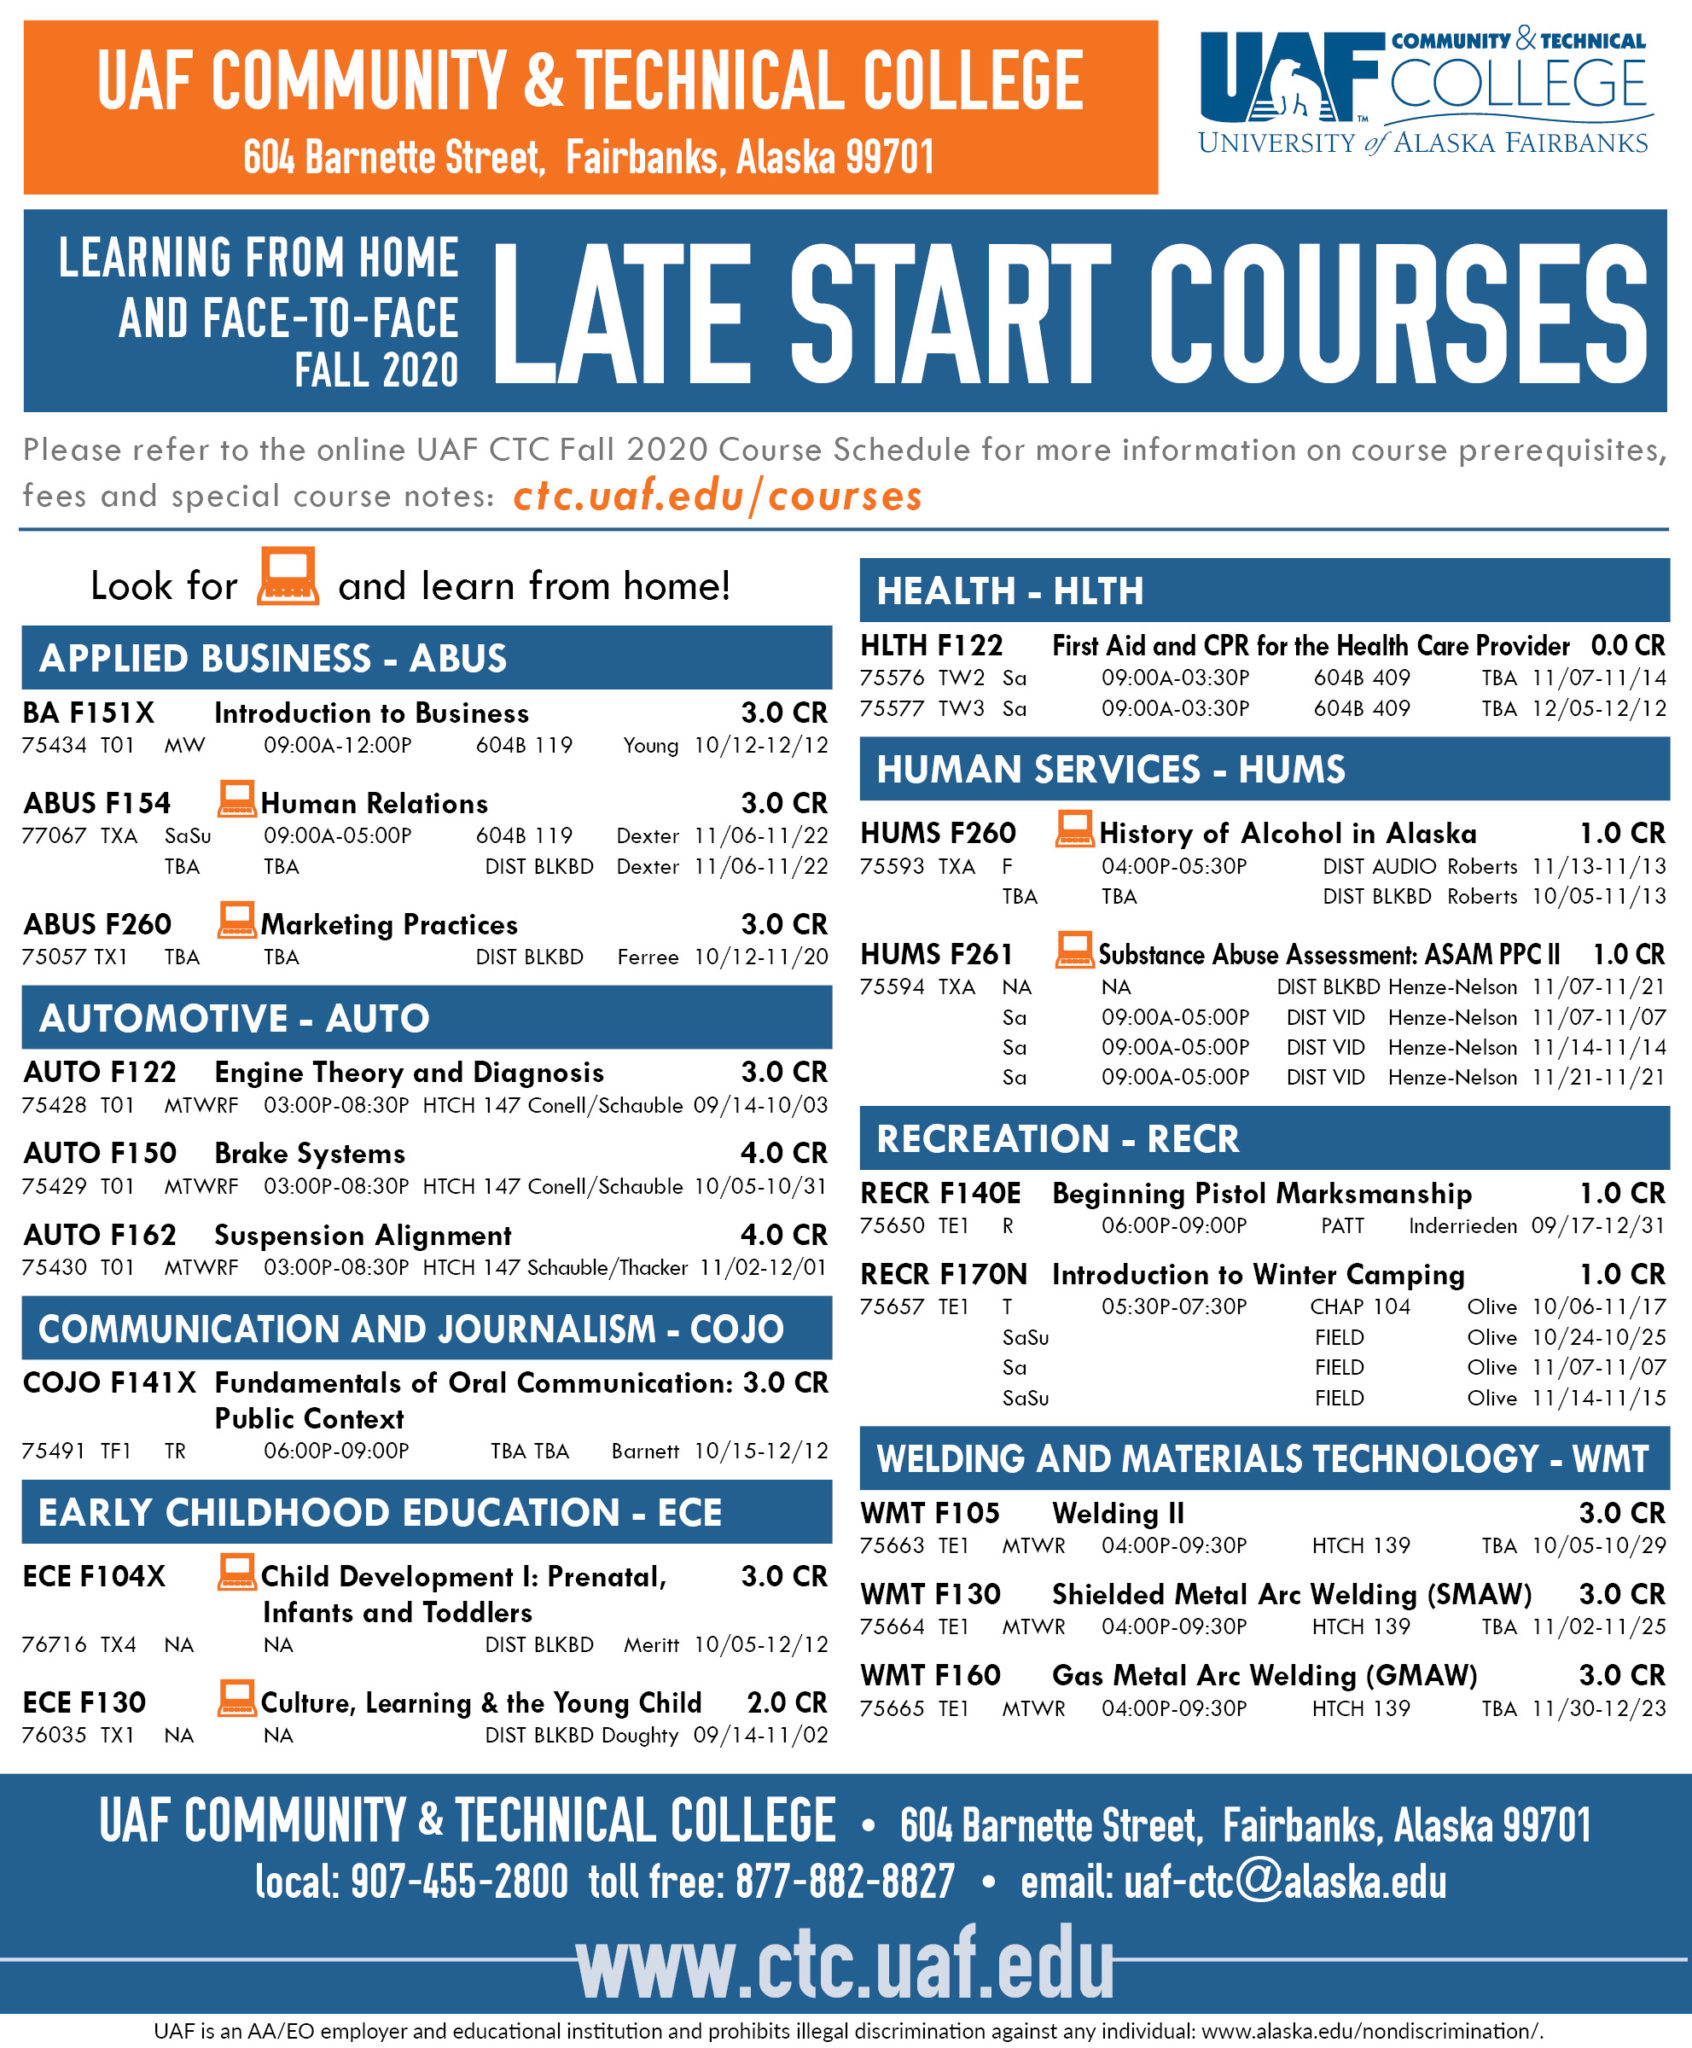 Fall 2020 late start courses open for registration - UAF Community